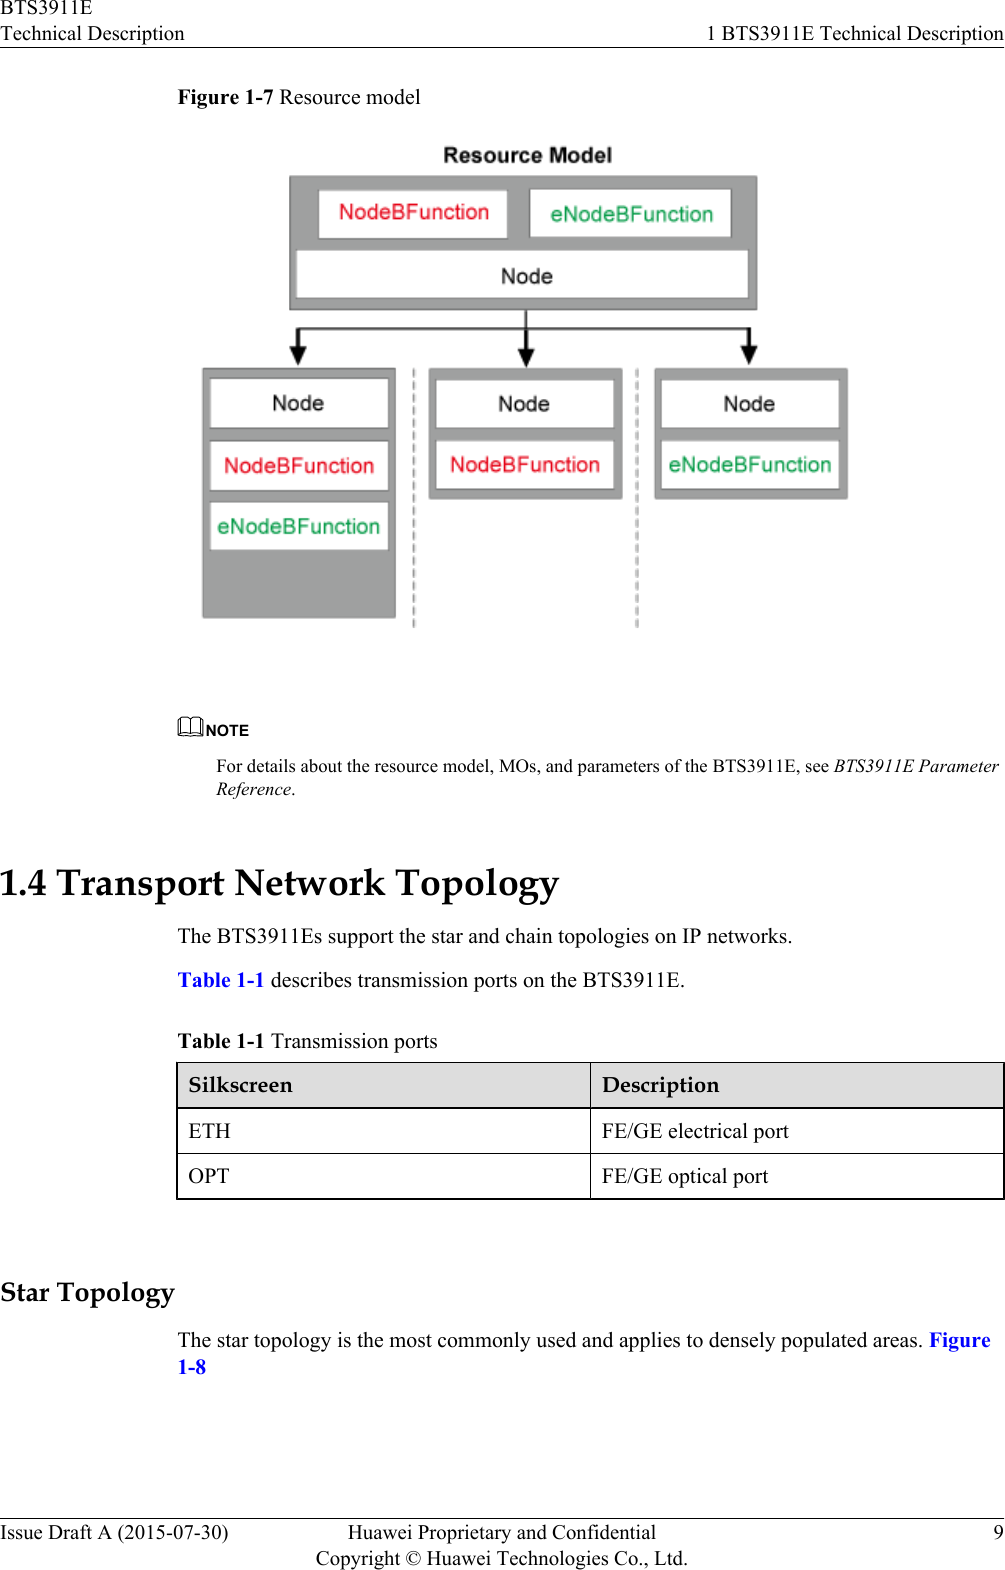 Figure 1-7 Resource modelNOTEFor details about the resource model, MOs, and parameters of the BTS3911E, see BTS3911E ParameterReference.1.4 Transport Network TopologyThe BTS3911Es support the star and chain topologies on IP networks.Table 1-1 describes transmission ports on the BTS3911E.Table 1-1 Transmission portsSilkscreen DescriptionETH FE/GE electrical portOPT FE/GE optical port Star TopologyThe star topology is the most commonly used and applies to densely populated areas. Figure1-8BTS3911ETechnical Description 1 BTS3911E Technical DescriptionIssue Draft A (2015-07-30) Huawei Proprietary and ConfidentialCopyright © Huawei Technologies Co., Ltd.9